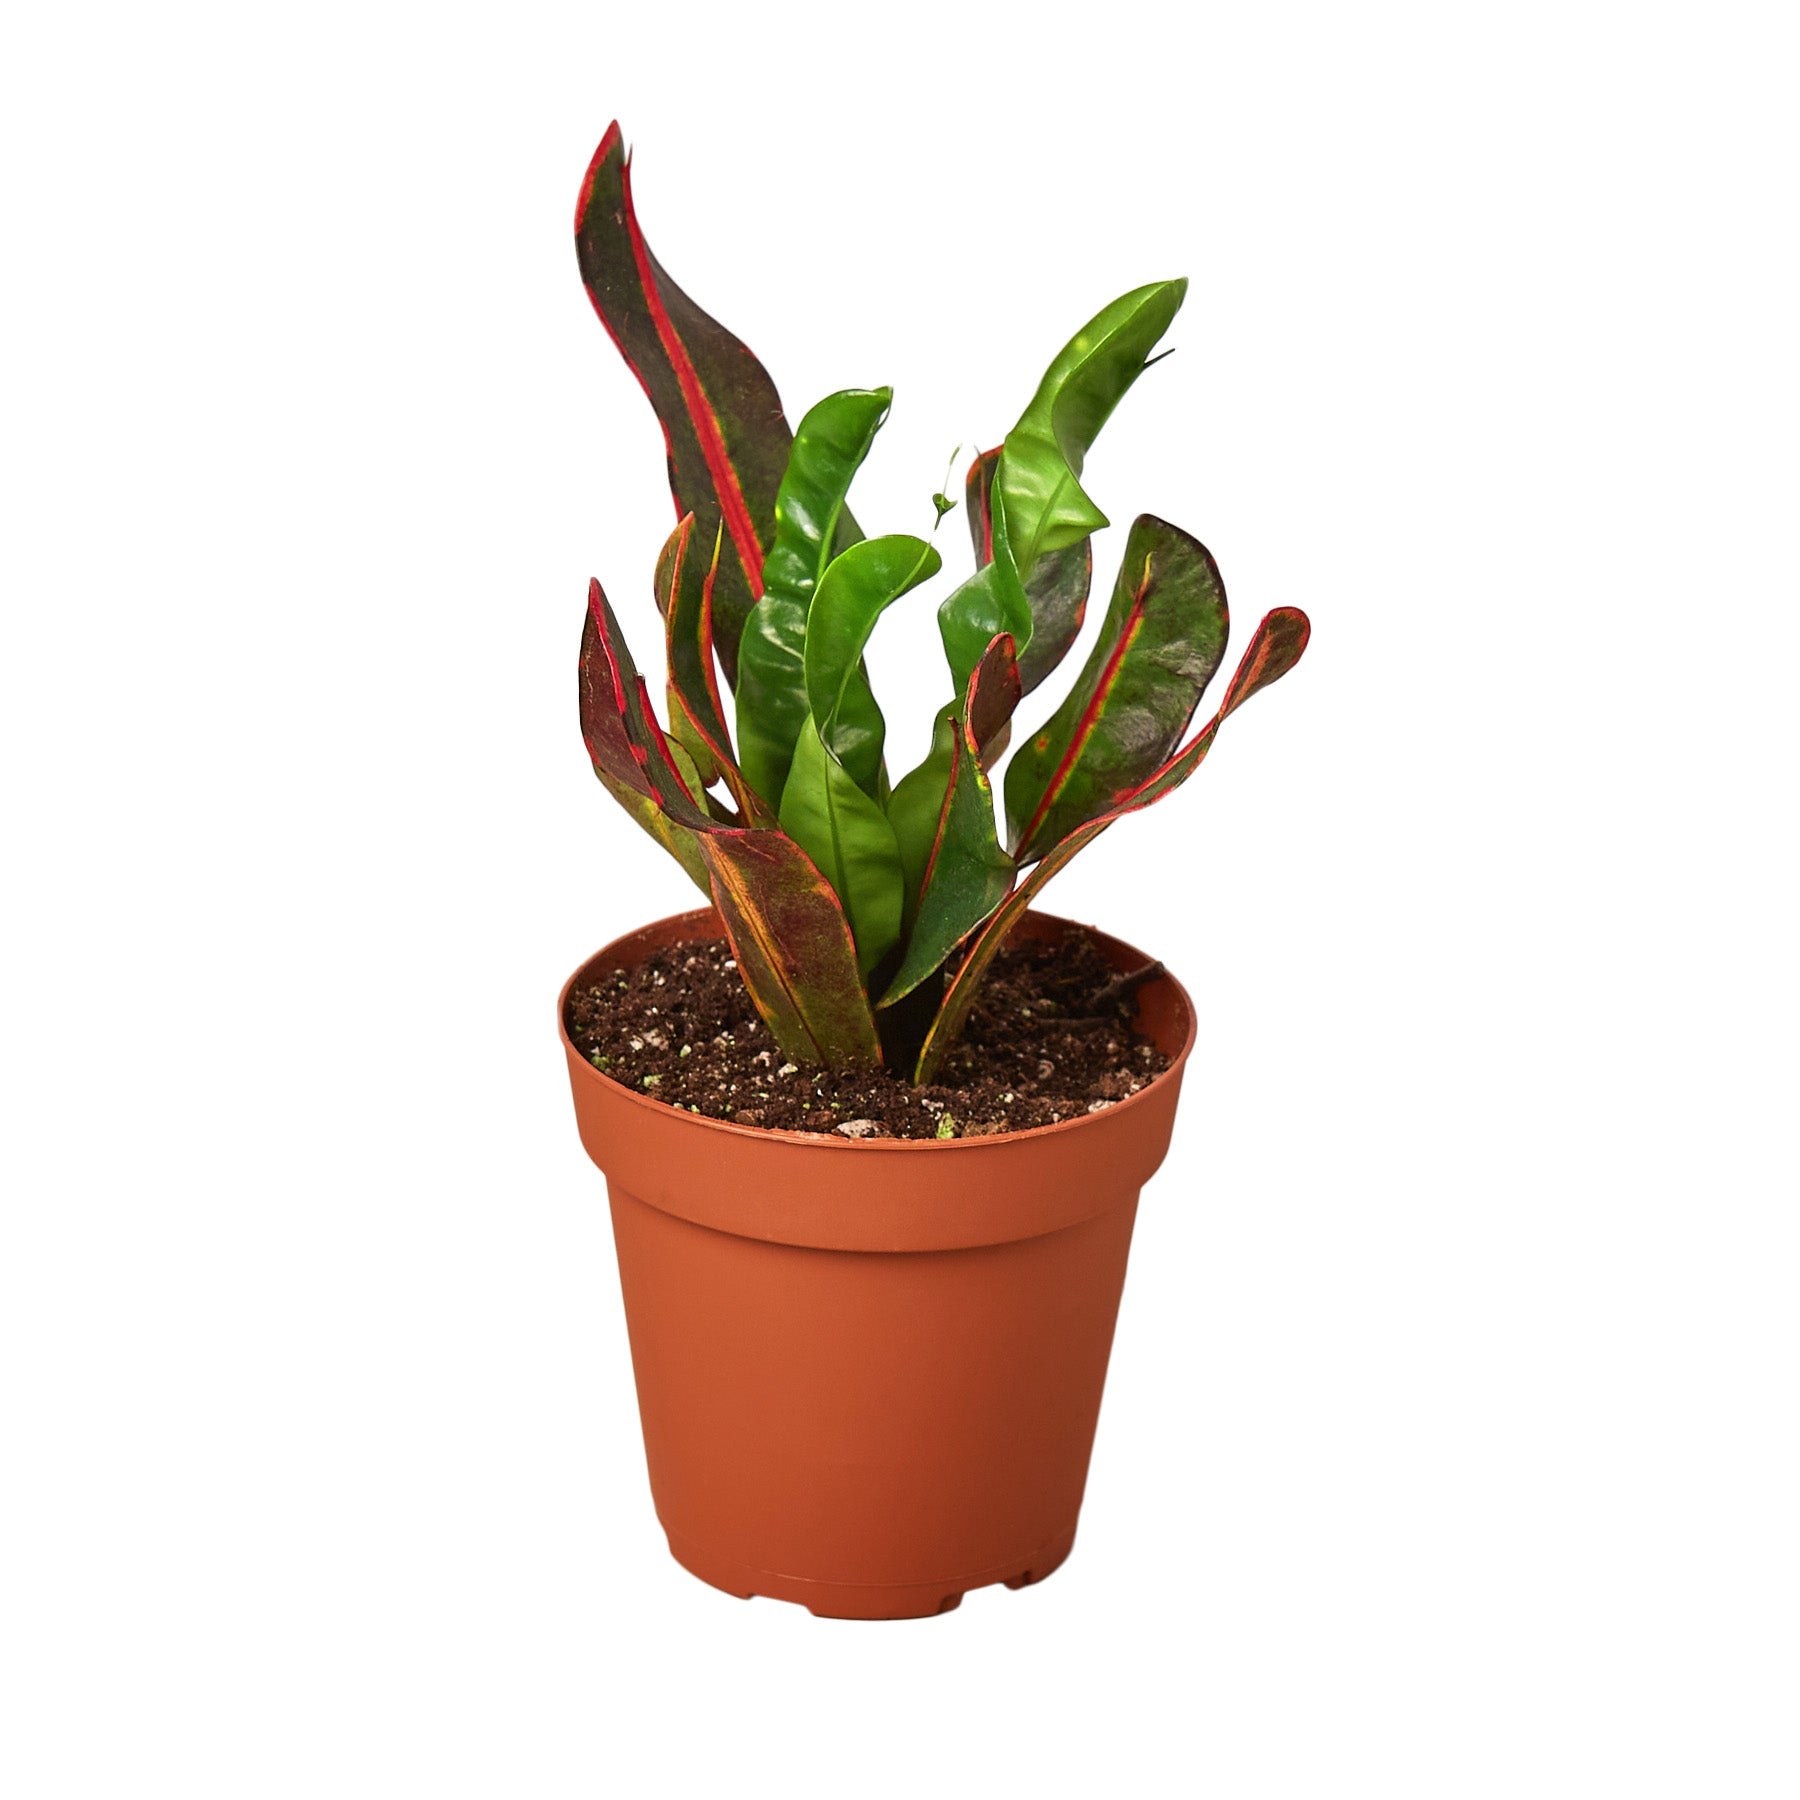 A potted plant with vibrant red and green leaves.